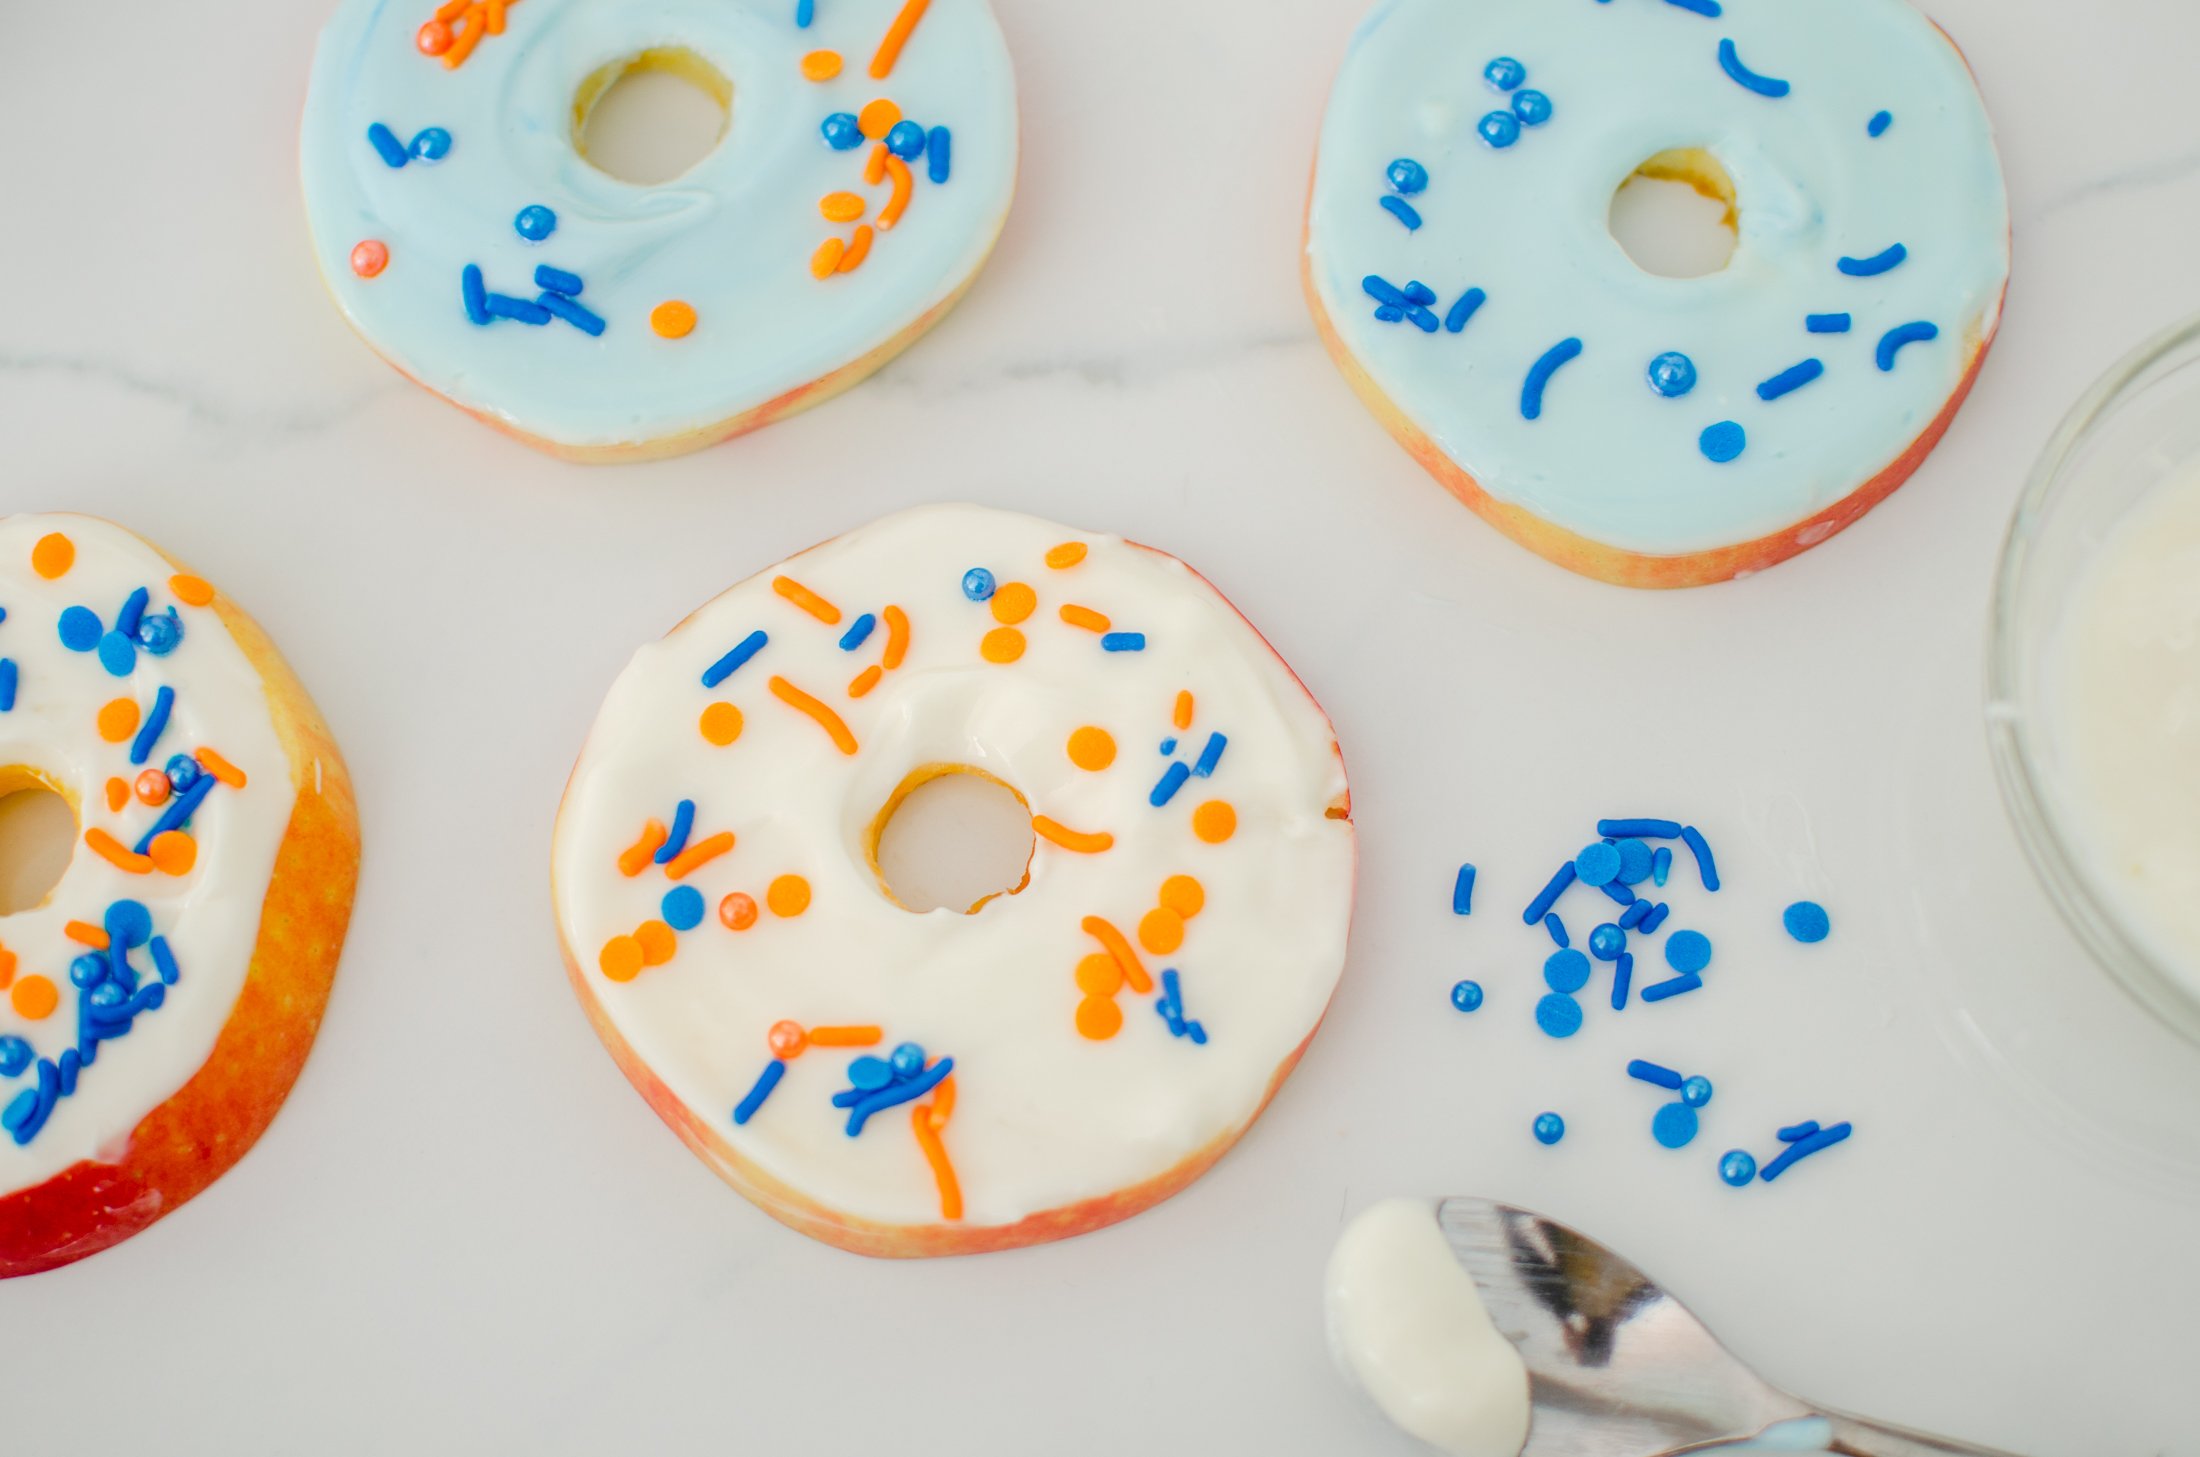 DIY Puffy Paint Donuts - With Love, Ima